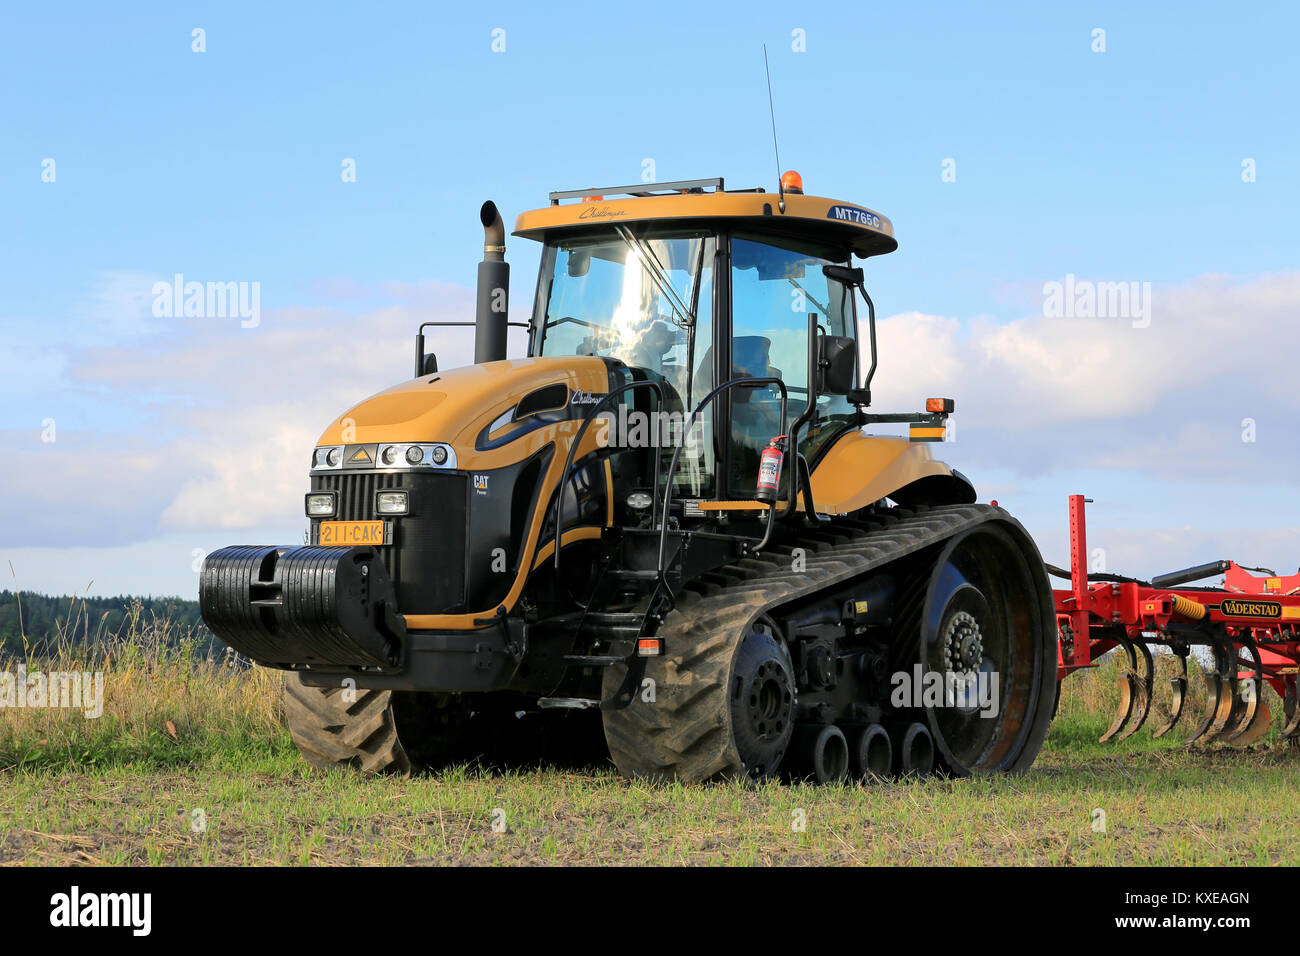 SALO, FINLAND -SEPTEMBER 6, 2014: Challenger MT765C crawler tractor and cultivator on field. MT765C has Caterpillar 8.8L 6-cyl diesel engine. Stock Photo